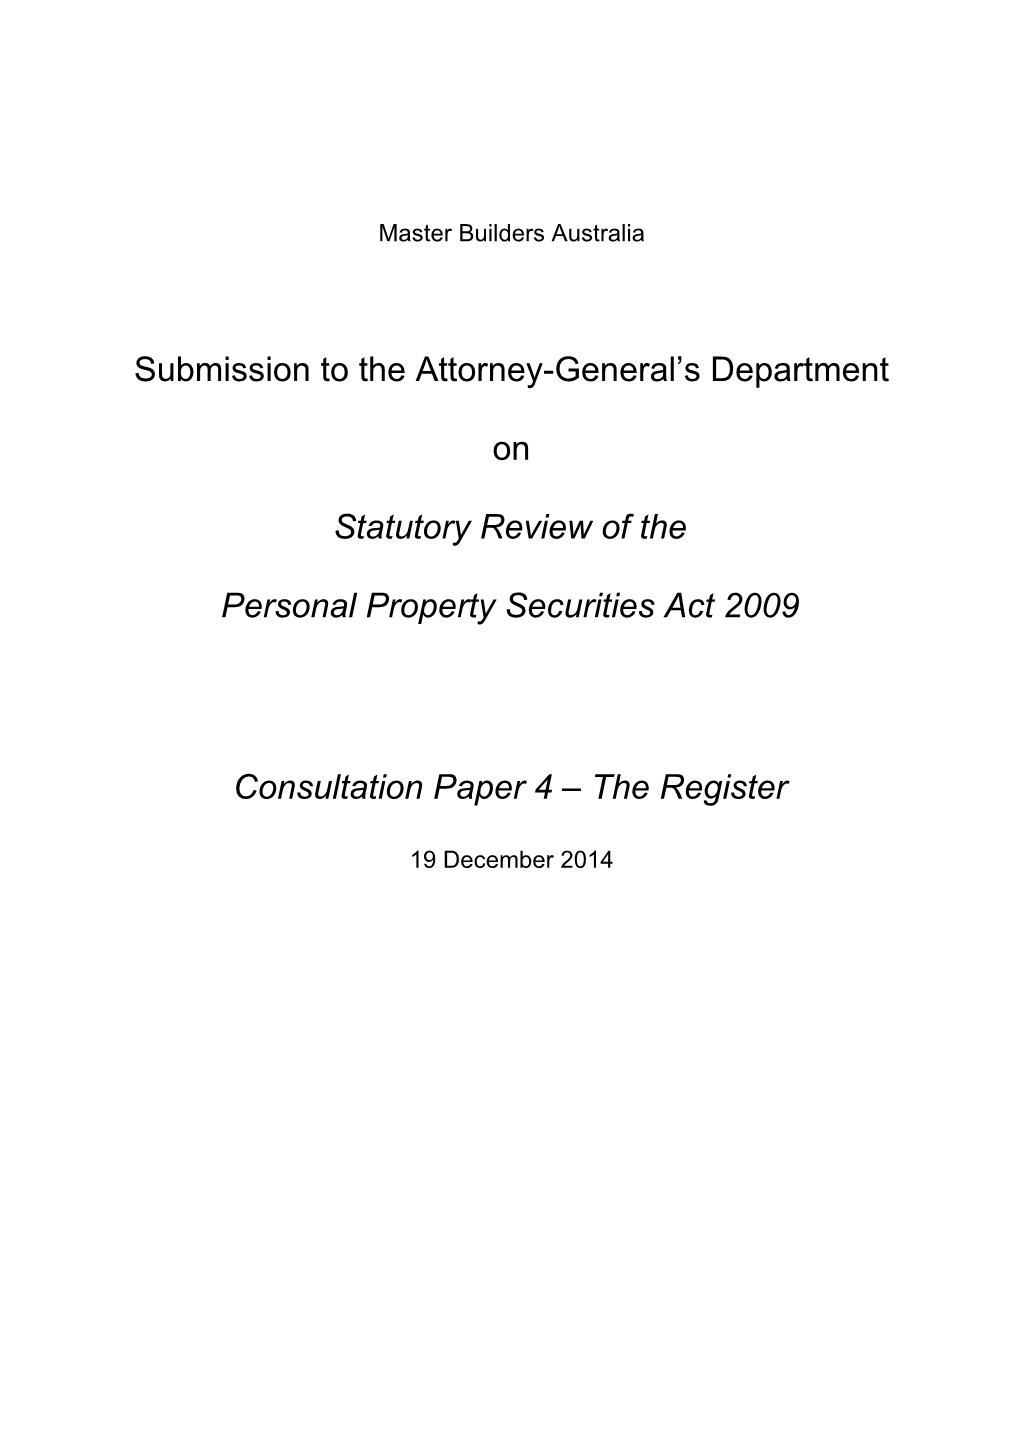 Review of the Personal Property Securities Act 2009 Consultation Response Master Builders